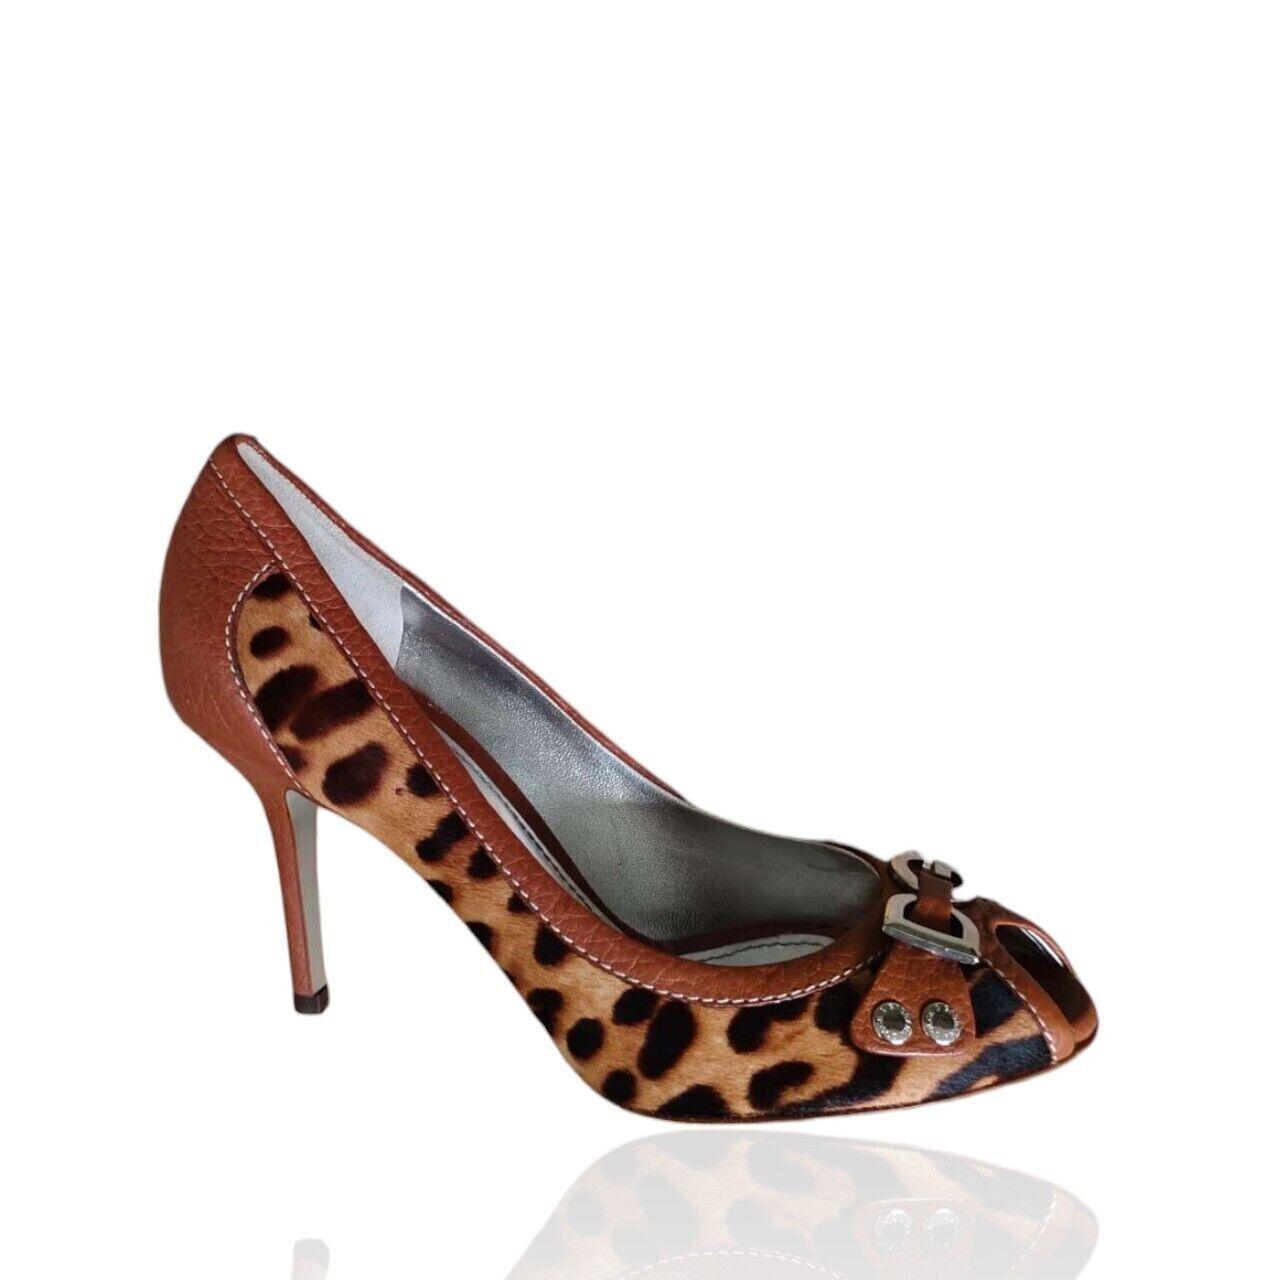 Dolce & Gabbana Leopard Printed Shoes